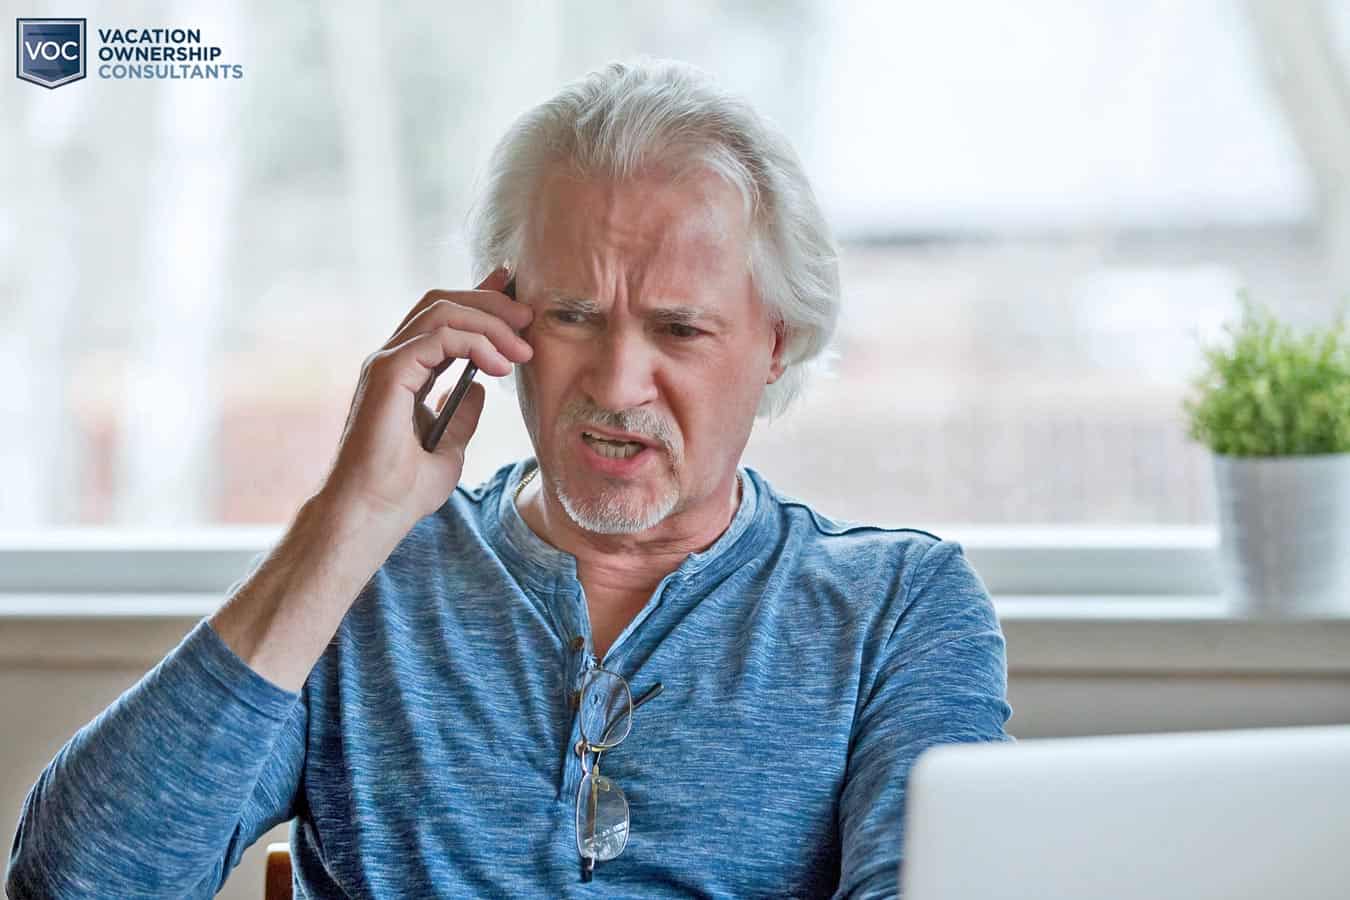 man-on-phone-with-collections-agency-from-destination-travel-resort-after-walking-away-from-timeshare-maintenance-fees-considering-cancellation-services-with-VOC